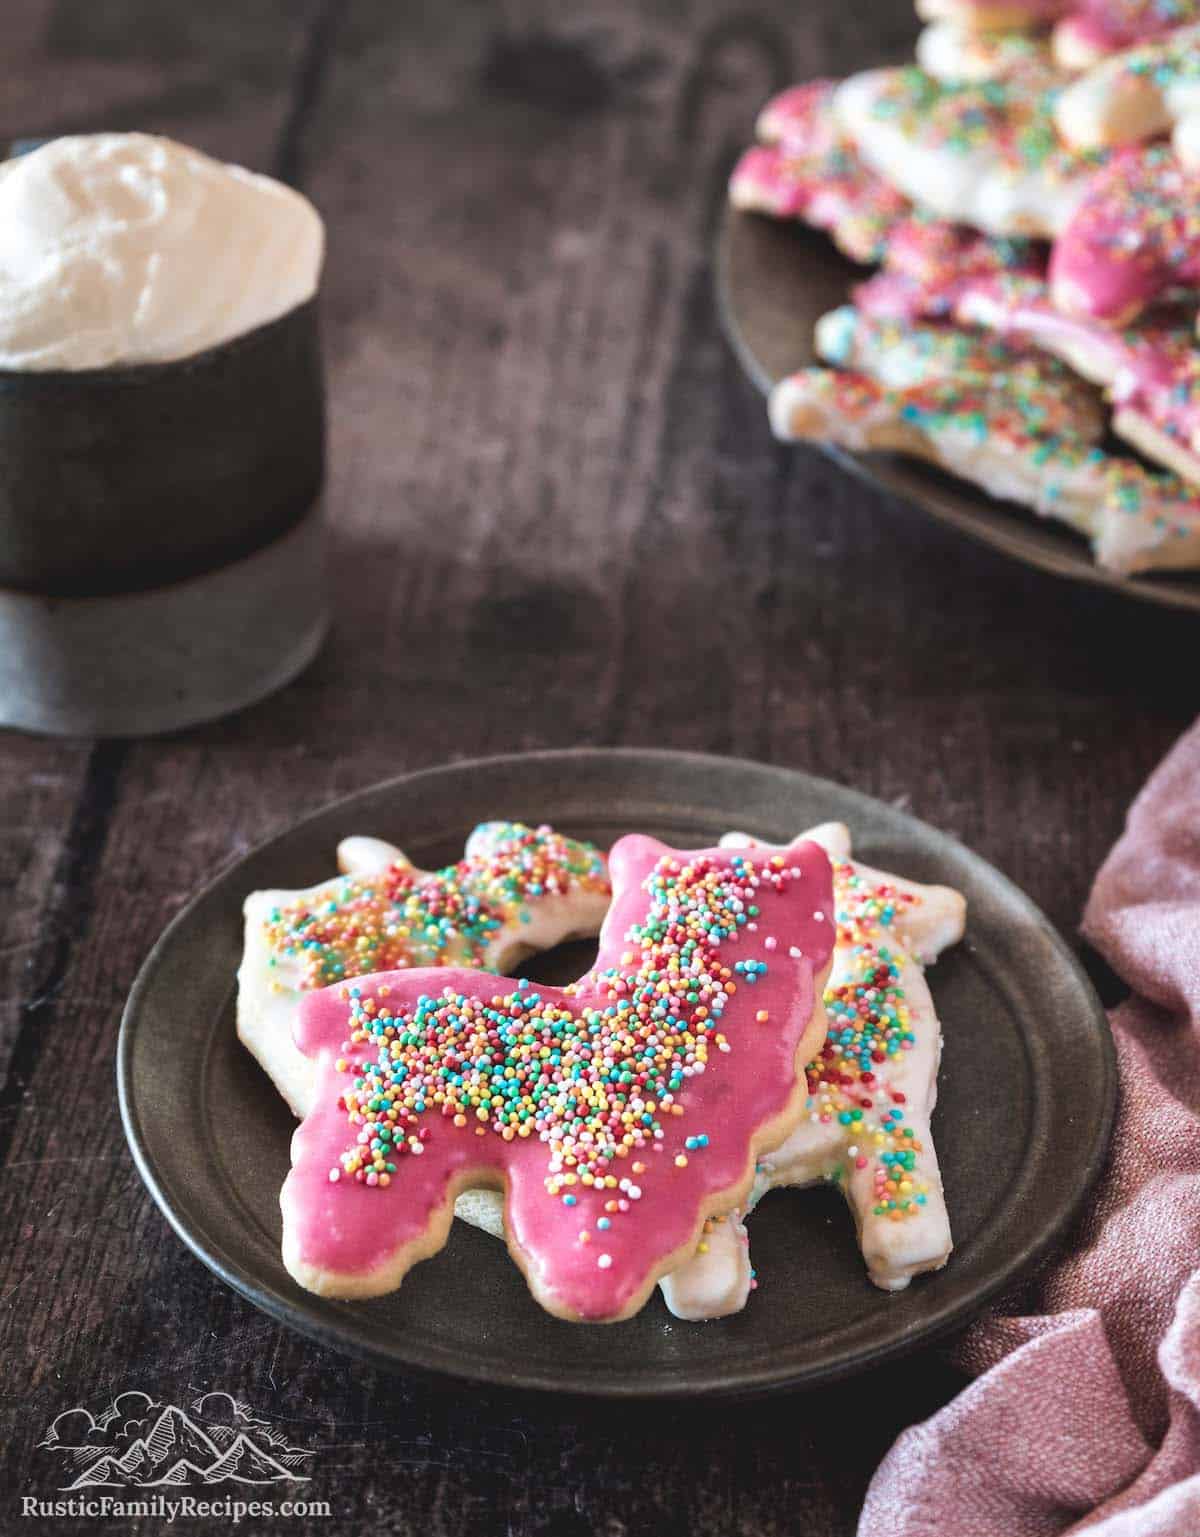 A plate with 3 frosted animal crackers on it